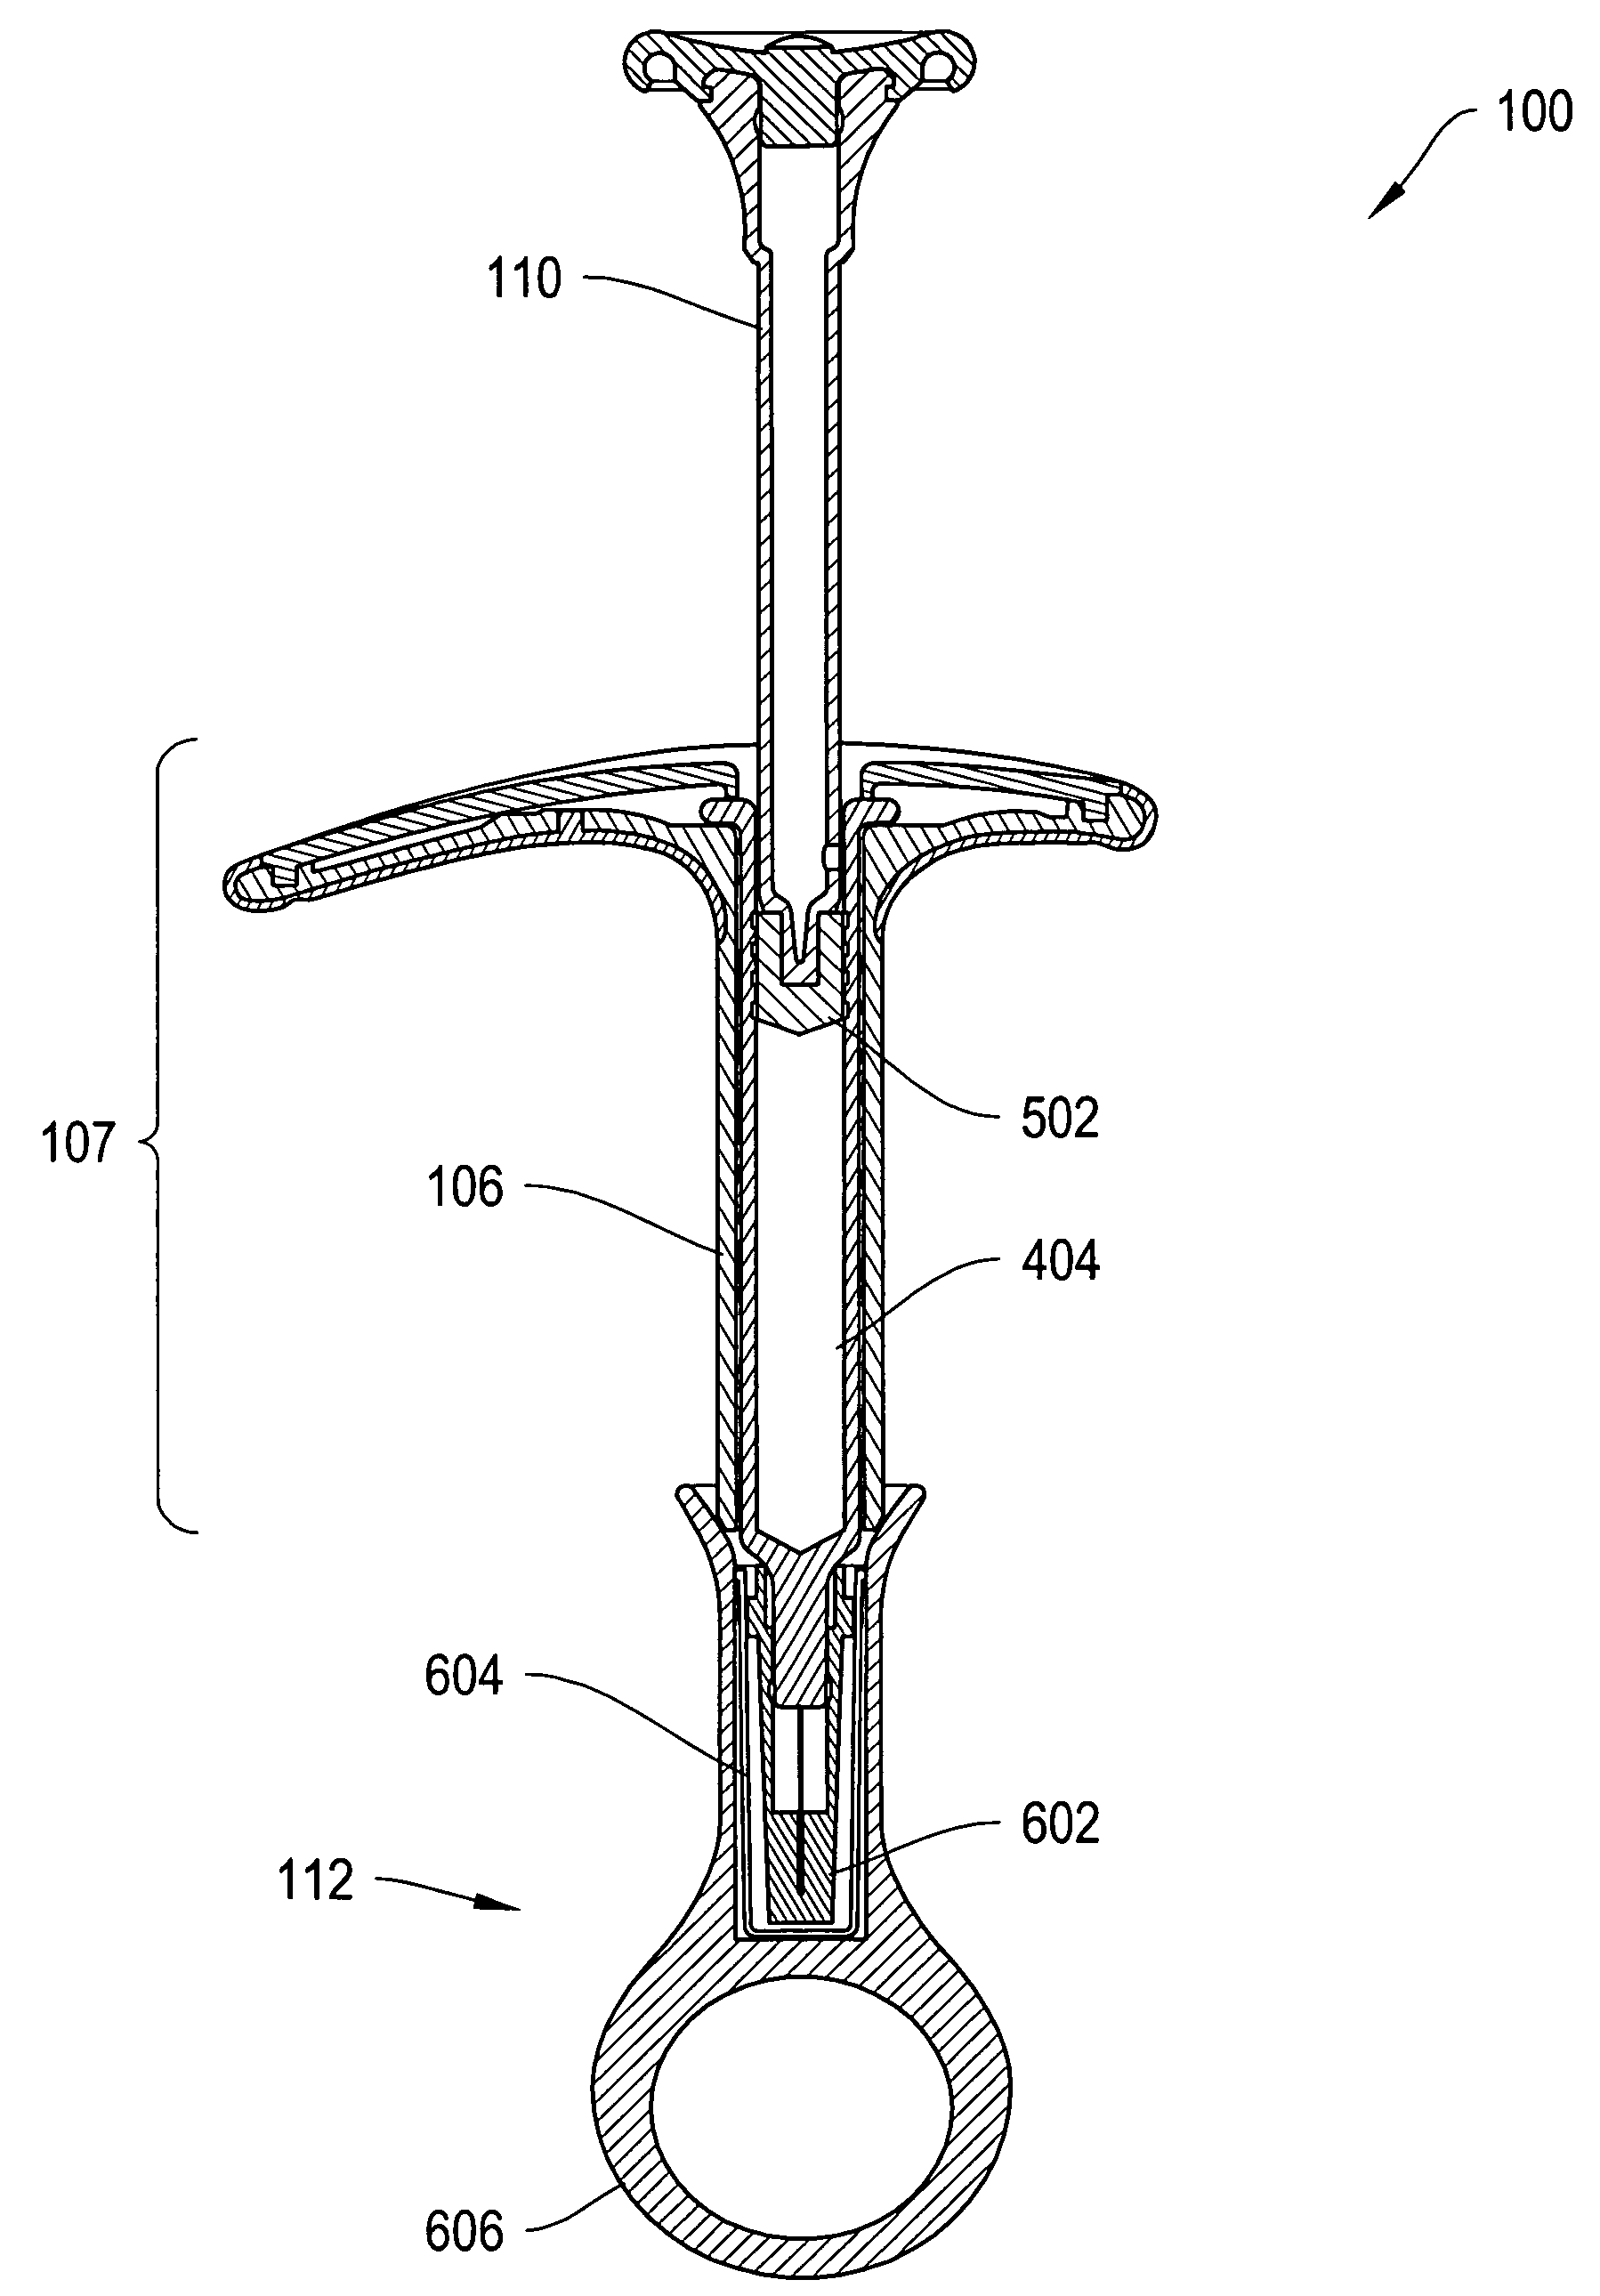 Systems and methods for administering medication